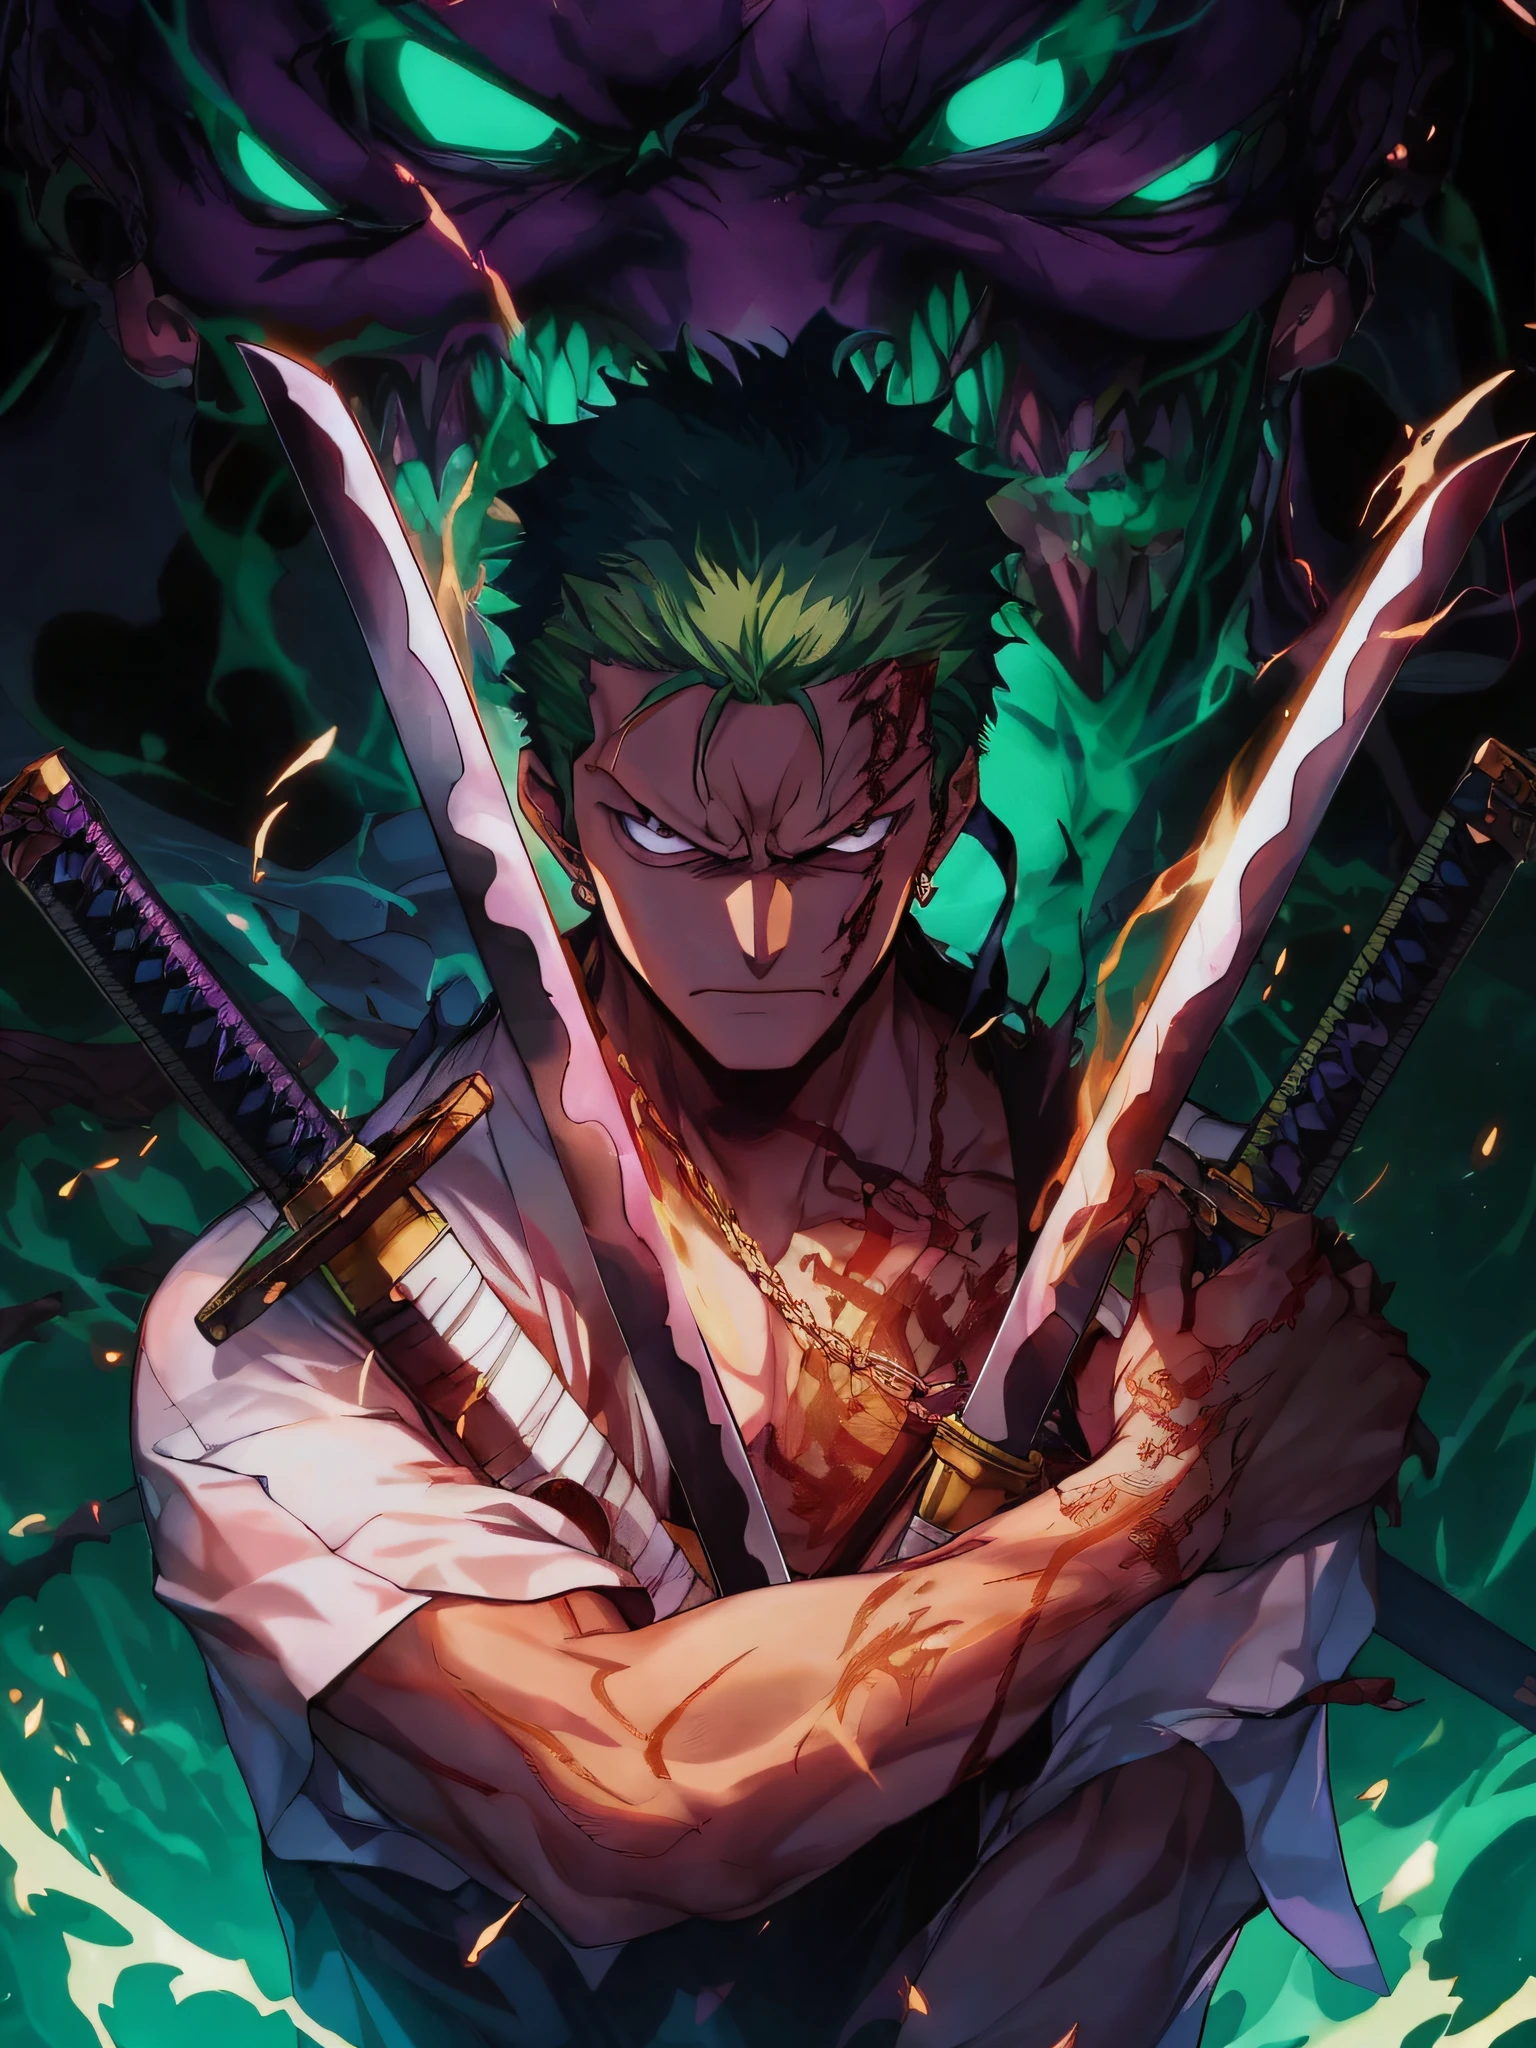 anime character with two swords in front of a demon, roronoa zoro, badass anime 8 k, anime epic artwork, 4 k manga wallpaper, anime wallpaper 4 k, anime wallpaper 4k, 4k anime wallpaper, anime wallaper, anime art wallpaper 4k, anime art wallpaper 4 k, anime masterpiece, anime style 4 k, anime art wallpaper 8 k